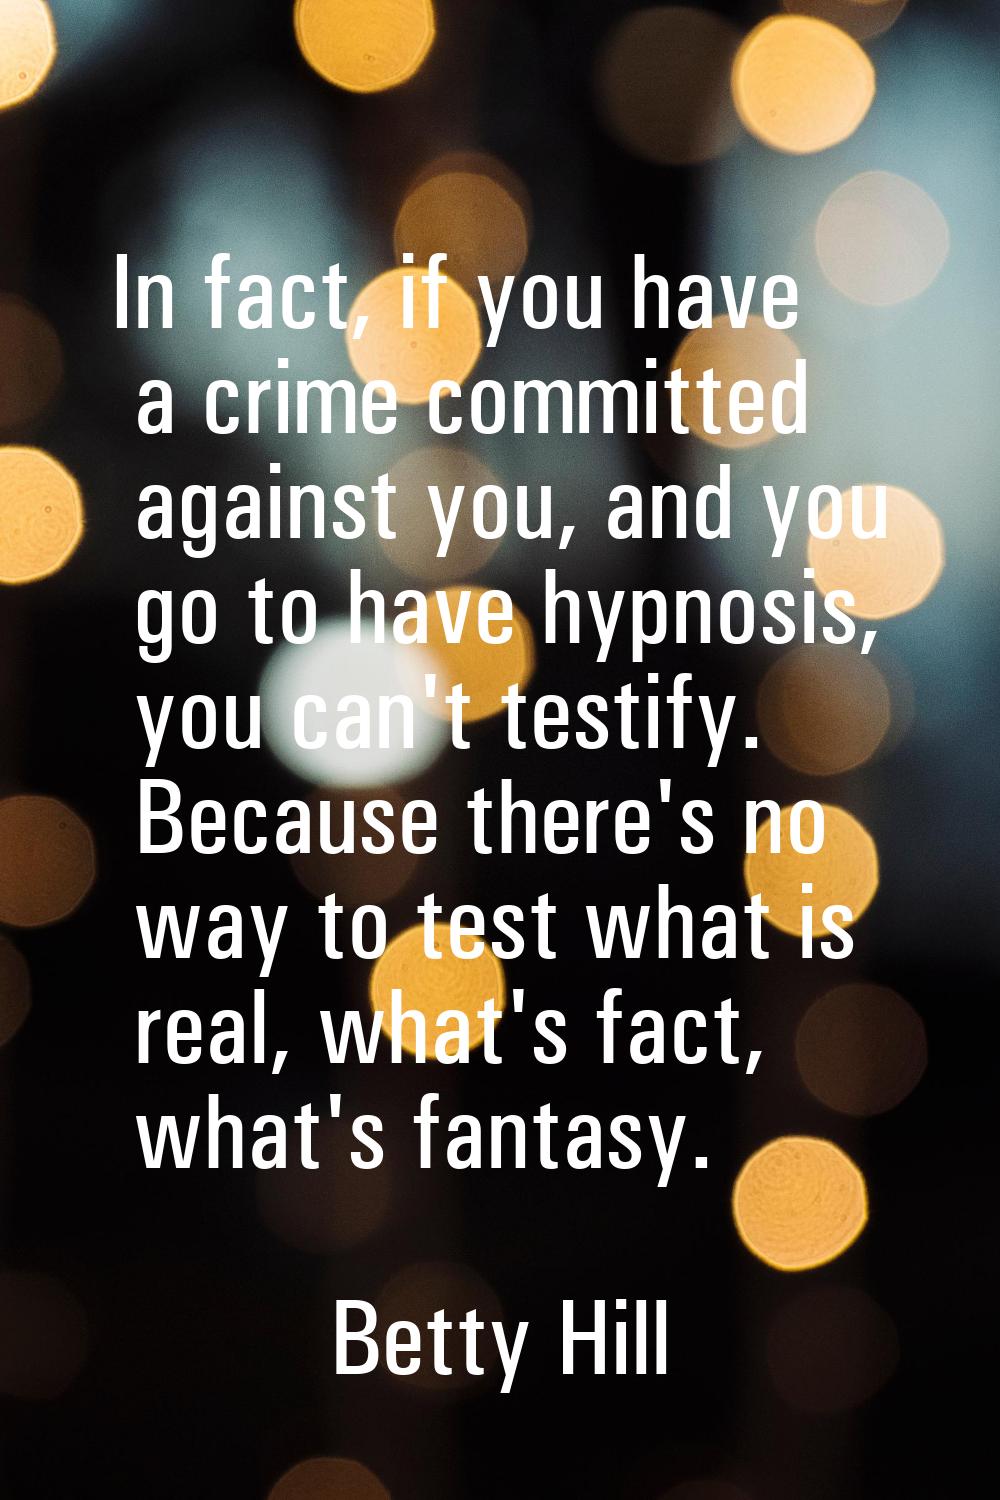 In fact, if you have a crime committed against you, and you go to have hypnosis, you can't testify.